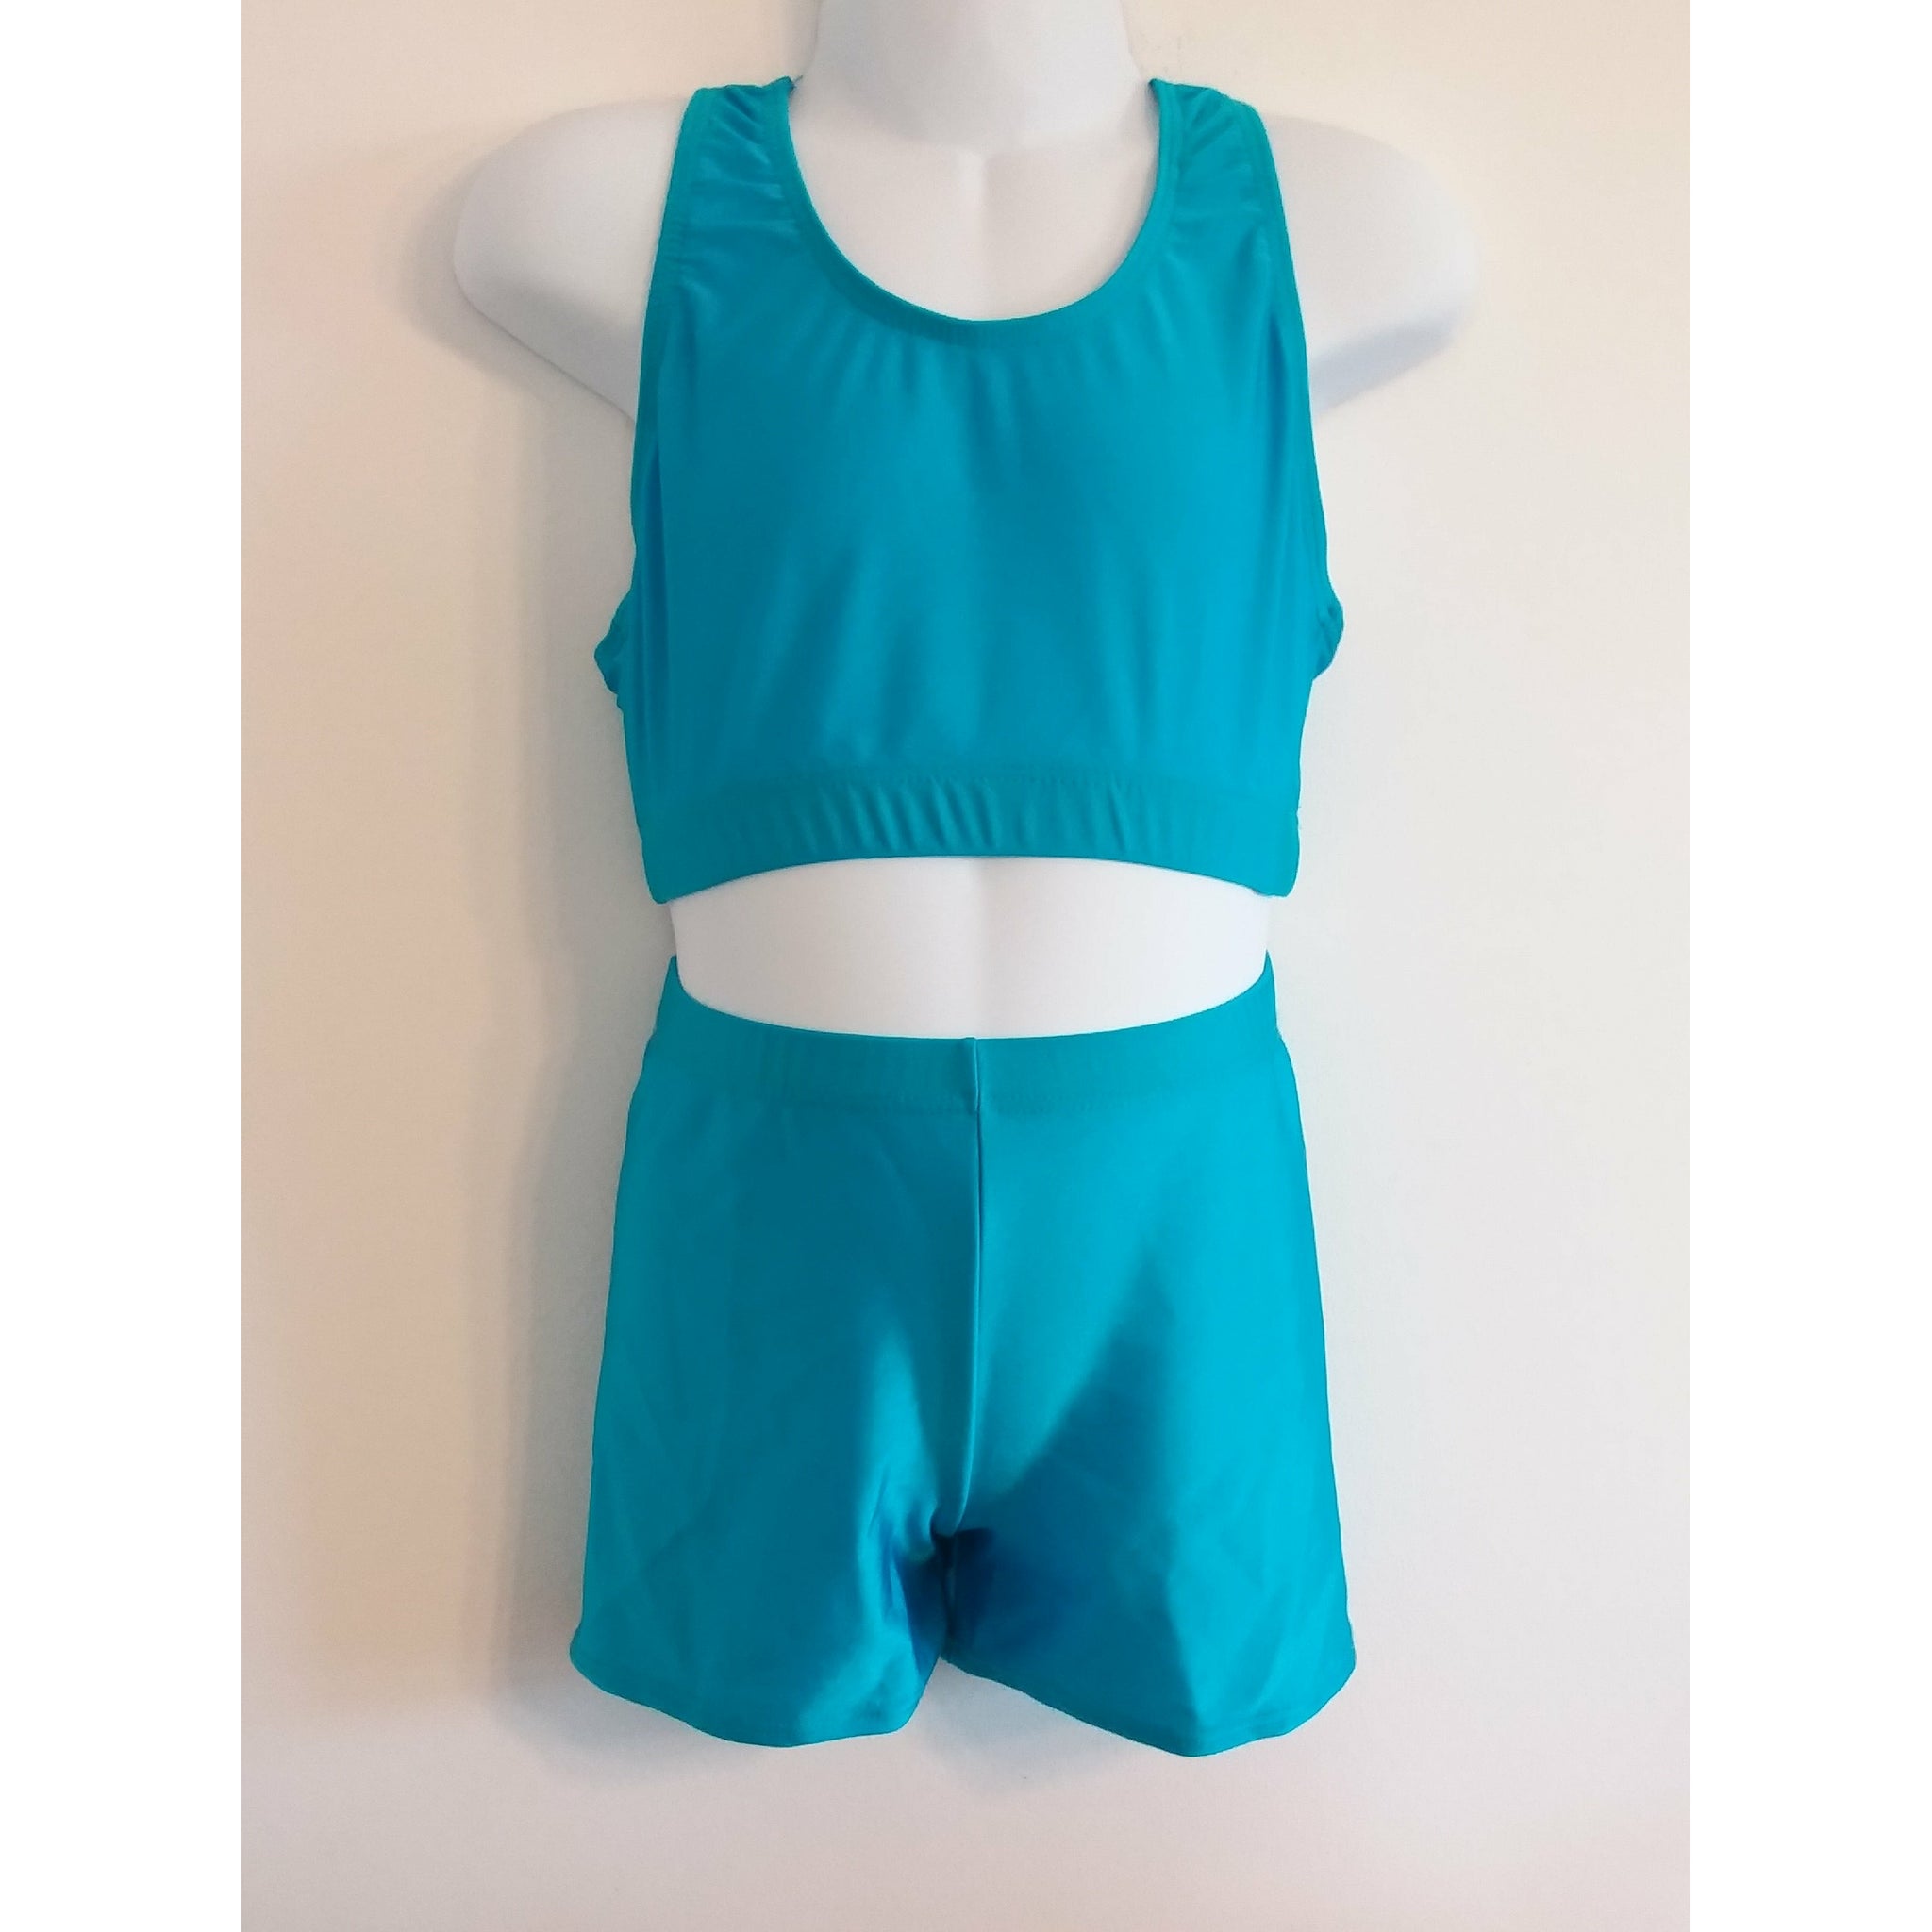 PRE-LOVED Turquoise Racer Back Crop Top & Shorts Set - age 7-8